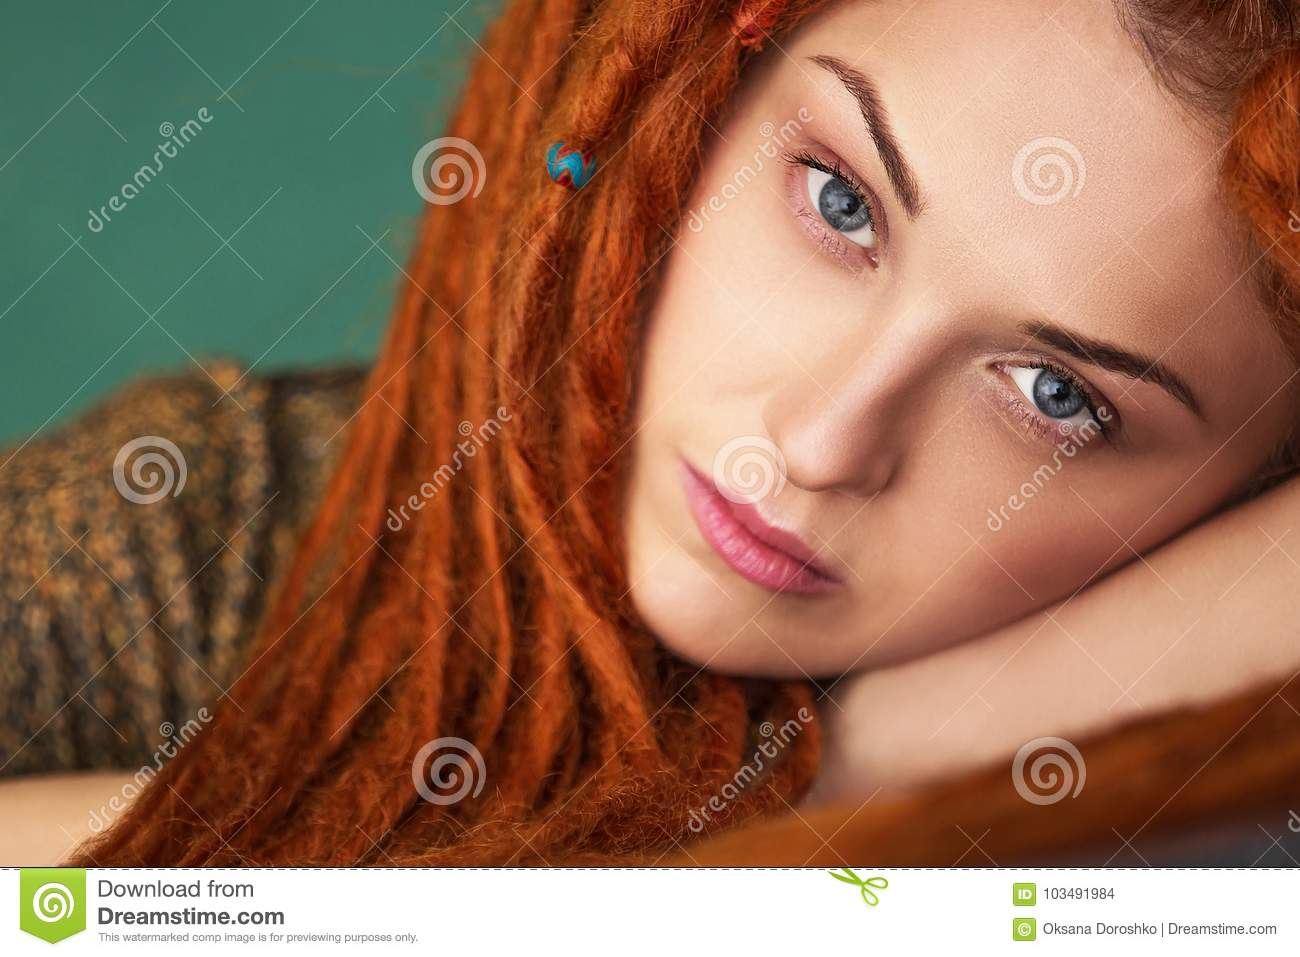 Makeup For Blue Eyes Red Hair Beautiful Girl With Red Hair And Blue Eyes Close Up Portrait Stock